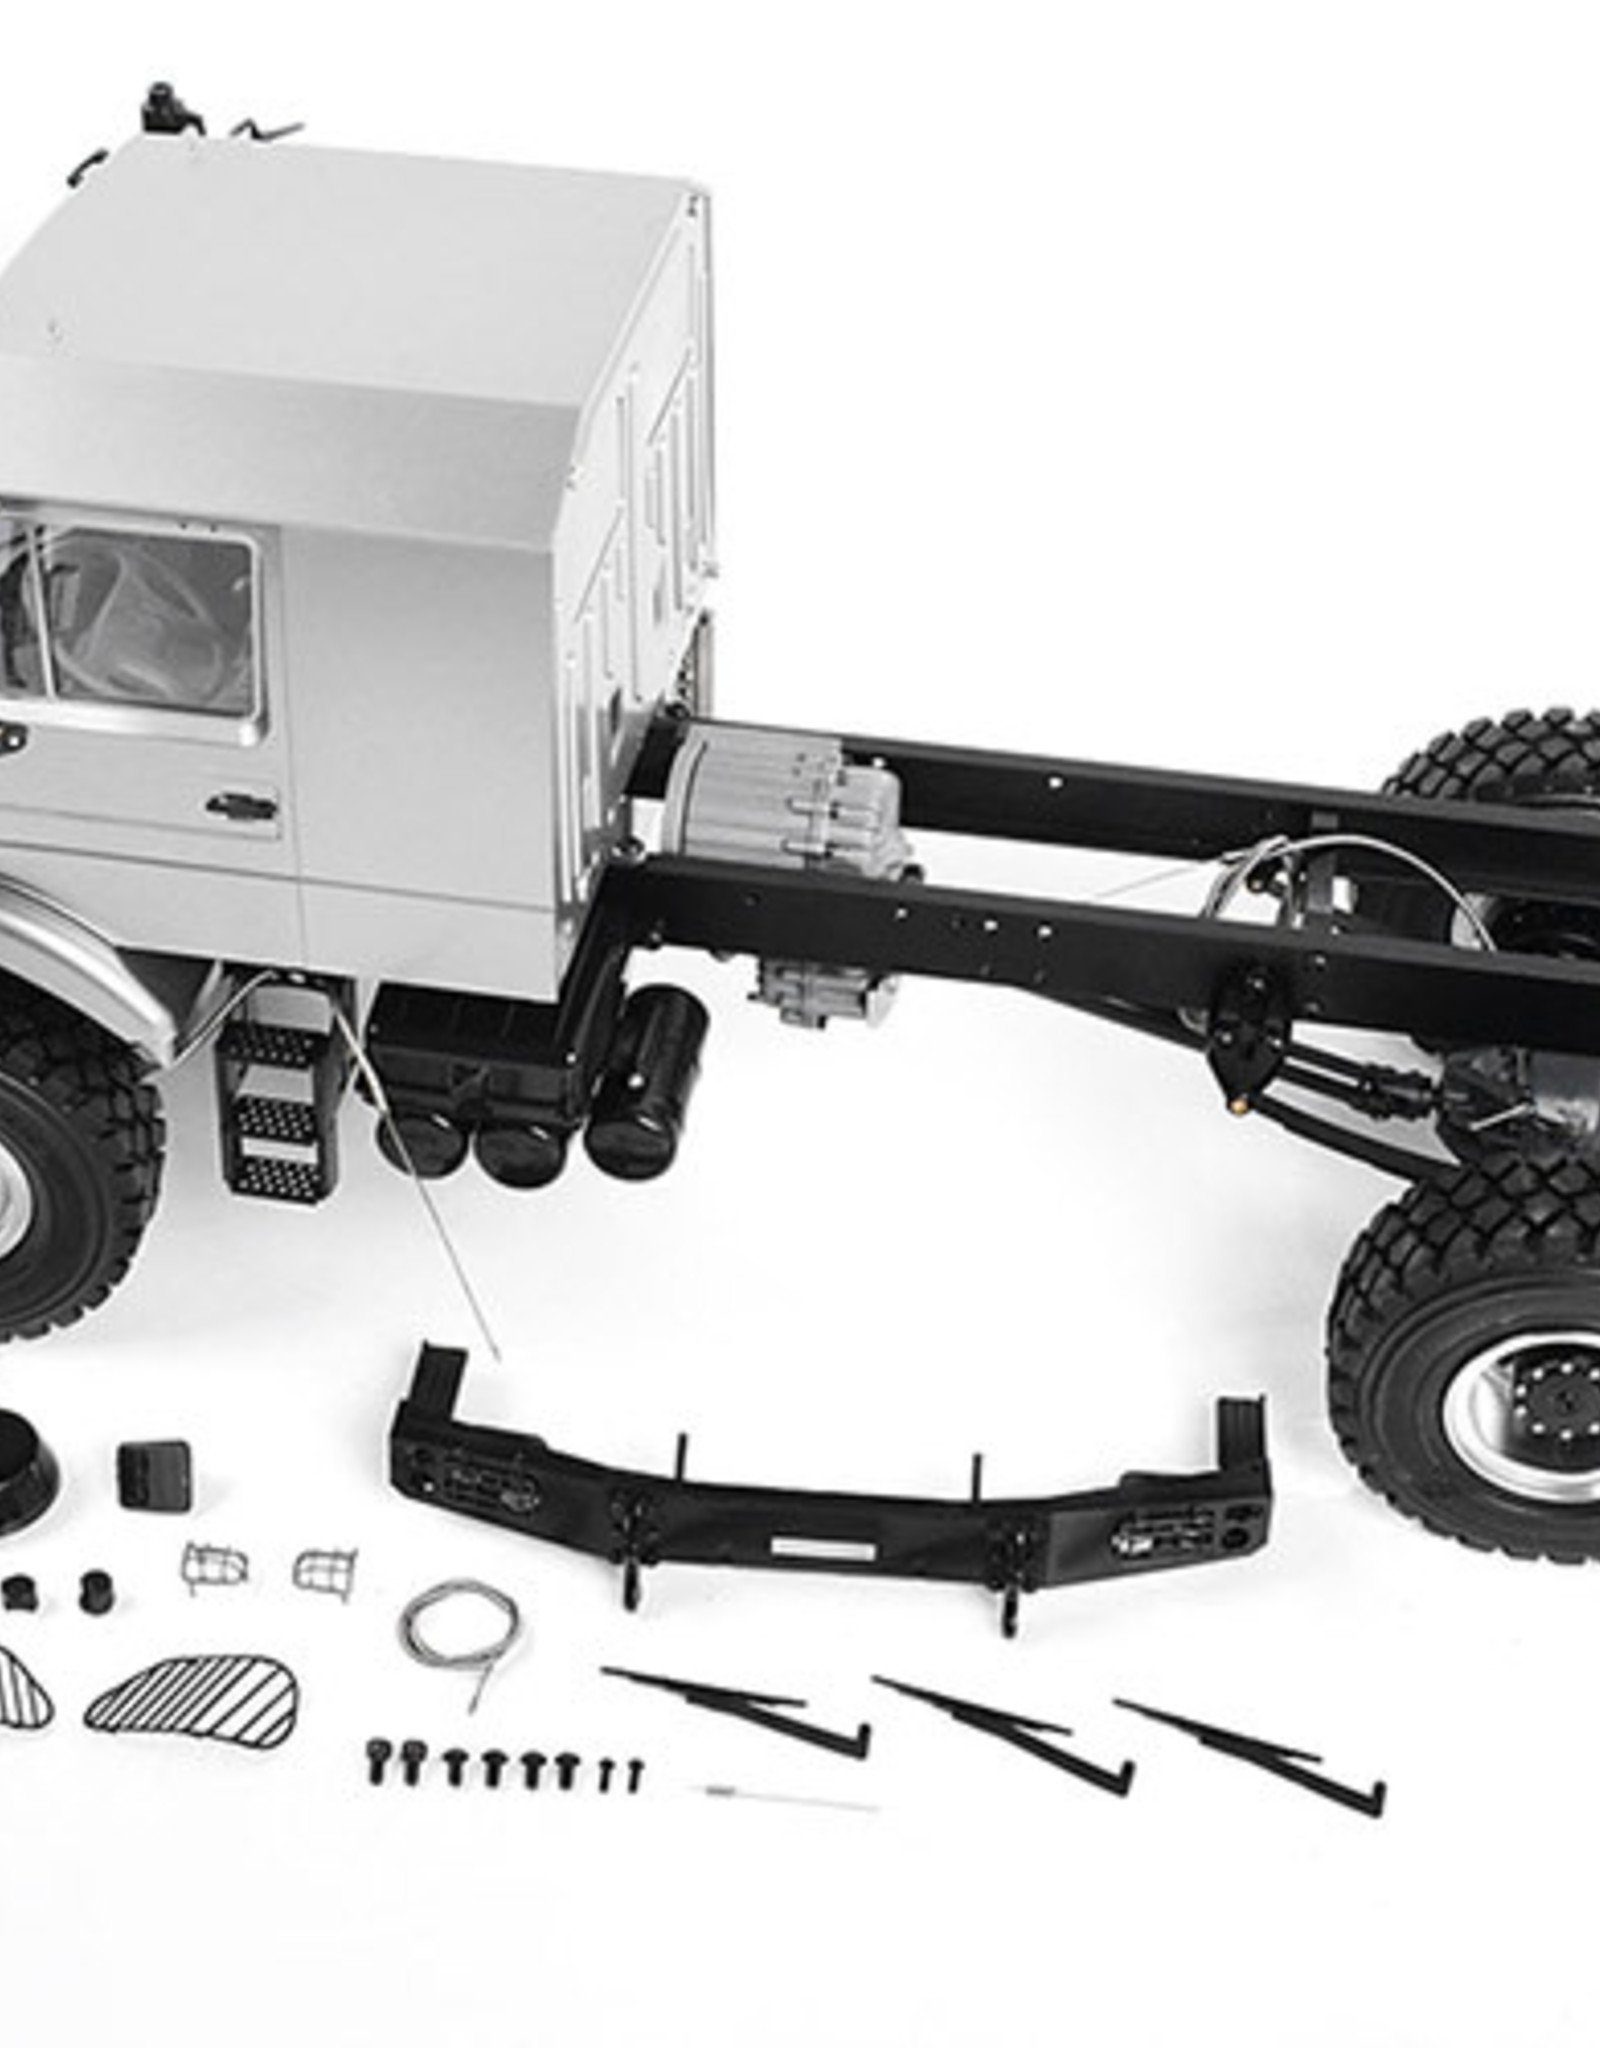 RC4WD RC4WD-VV-JD00041 1/14 Overland 4x4 ARTR RC Truck